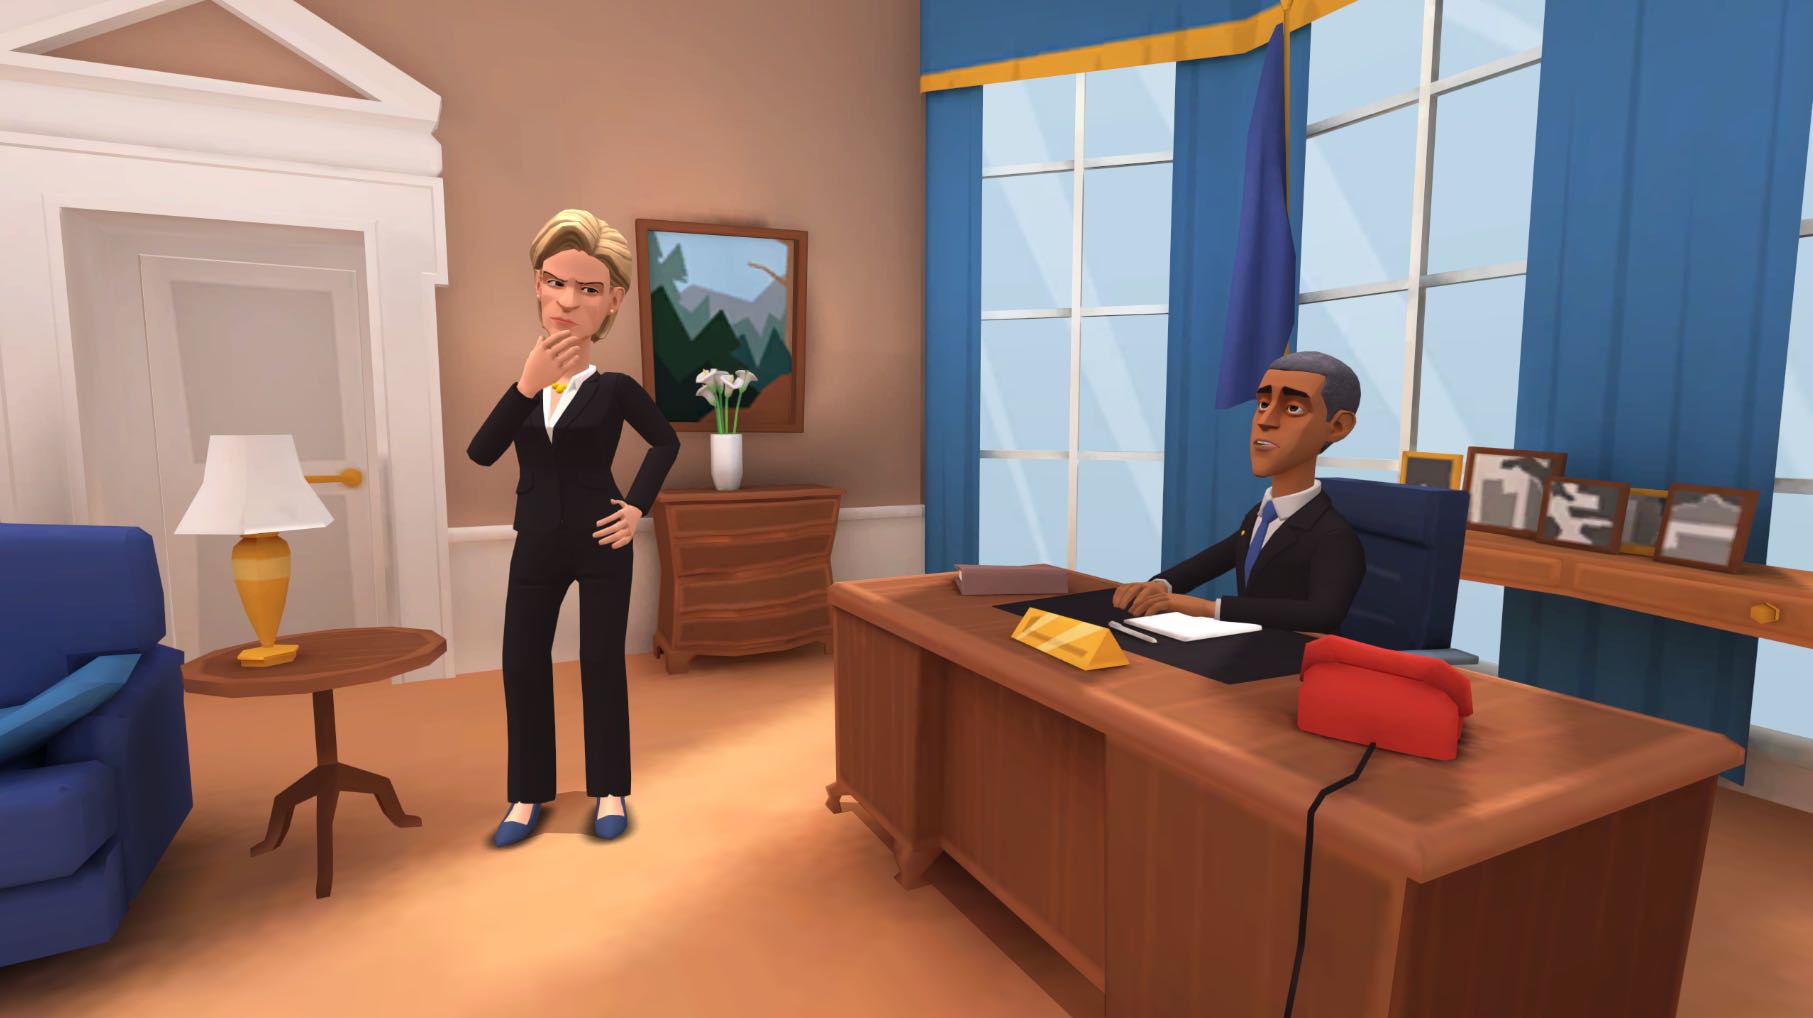 Create your own characters and stories starring politicians you love (or loathe) in Plotagon.